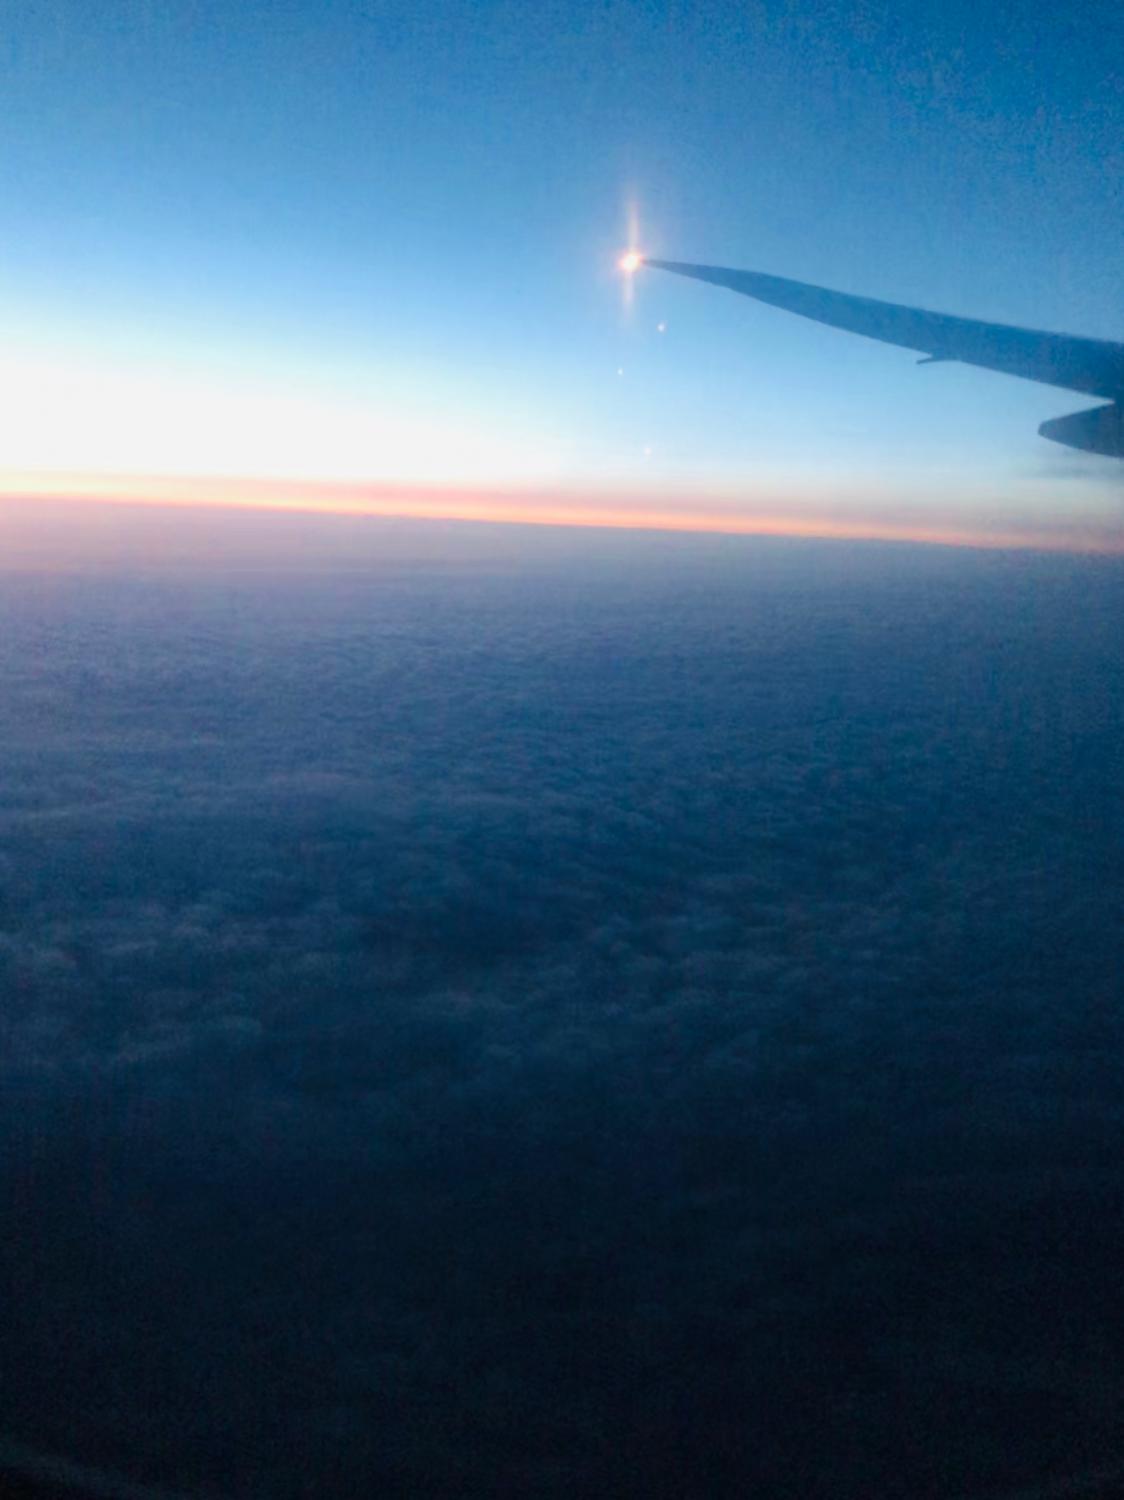 Image: Plane wing over clouds at sunset. The view from my flight out of Orlando to my connection in Dubai